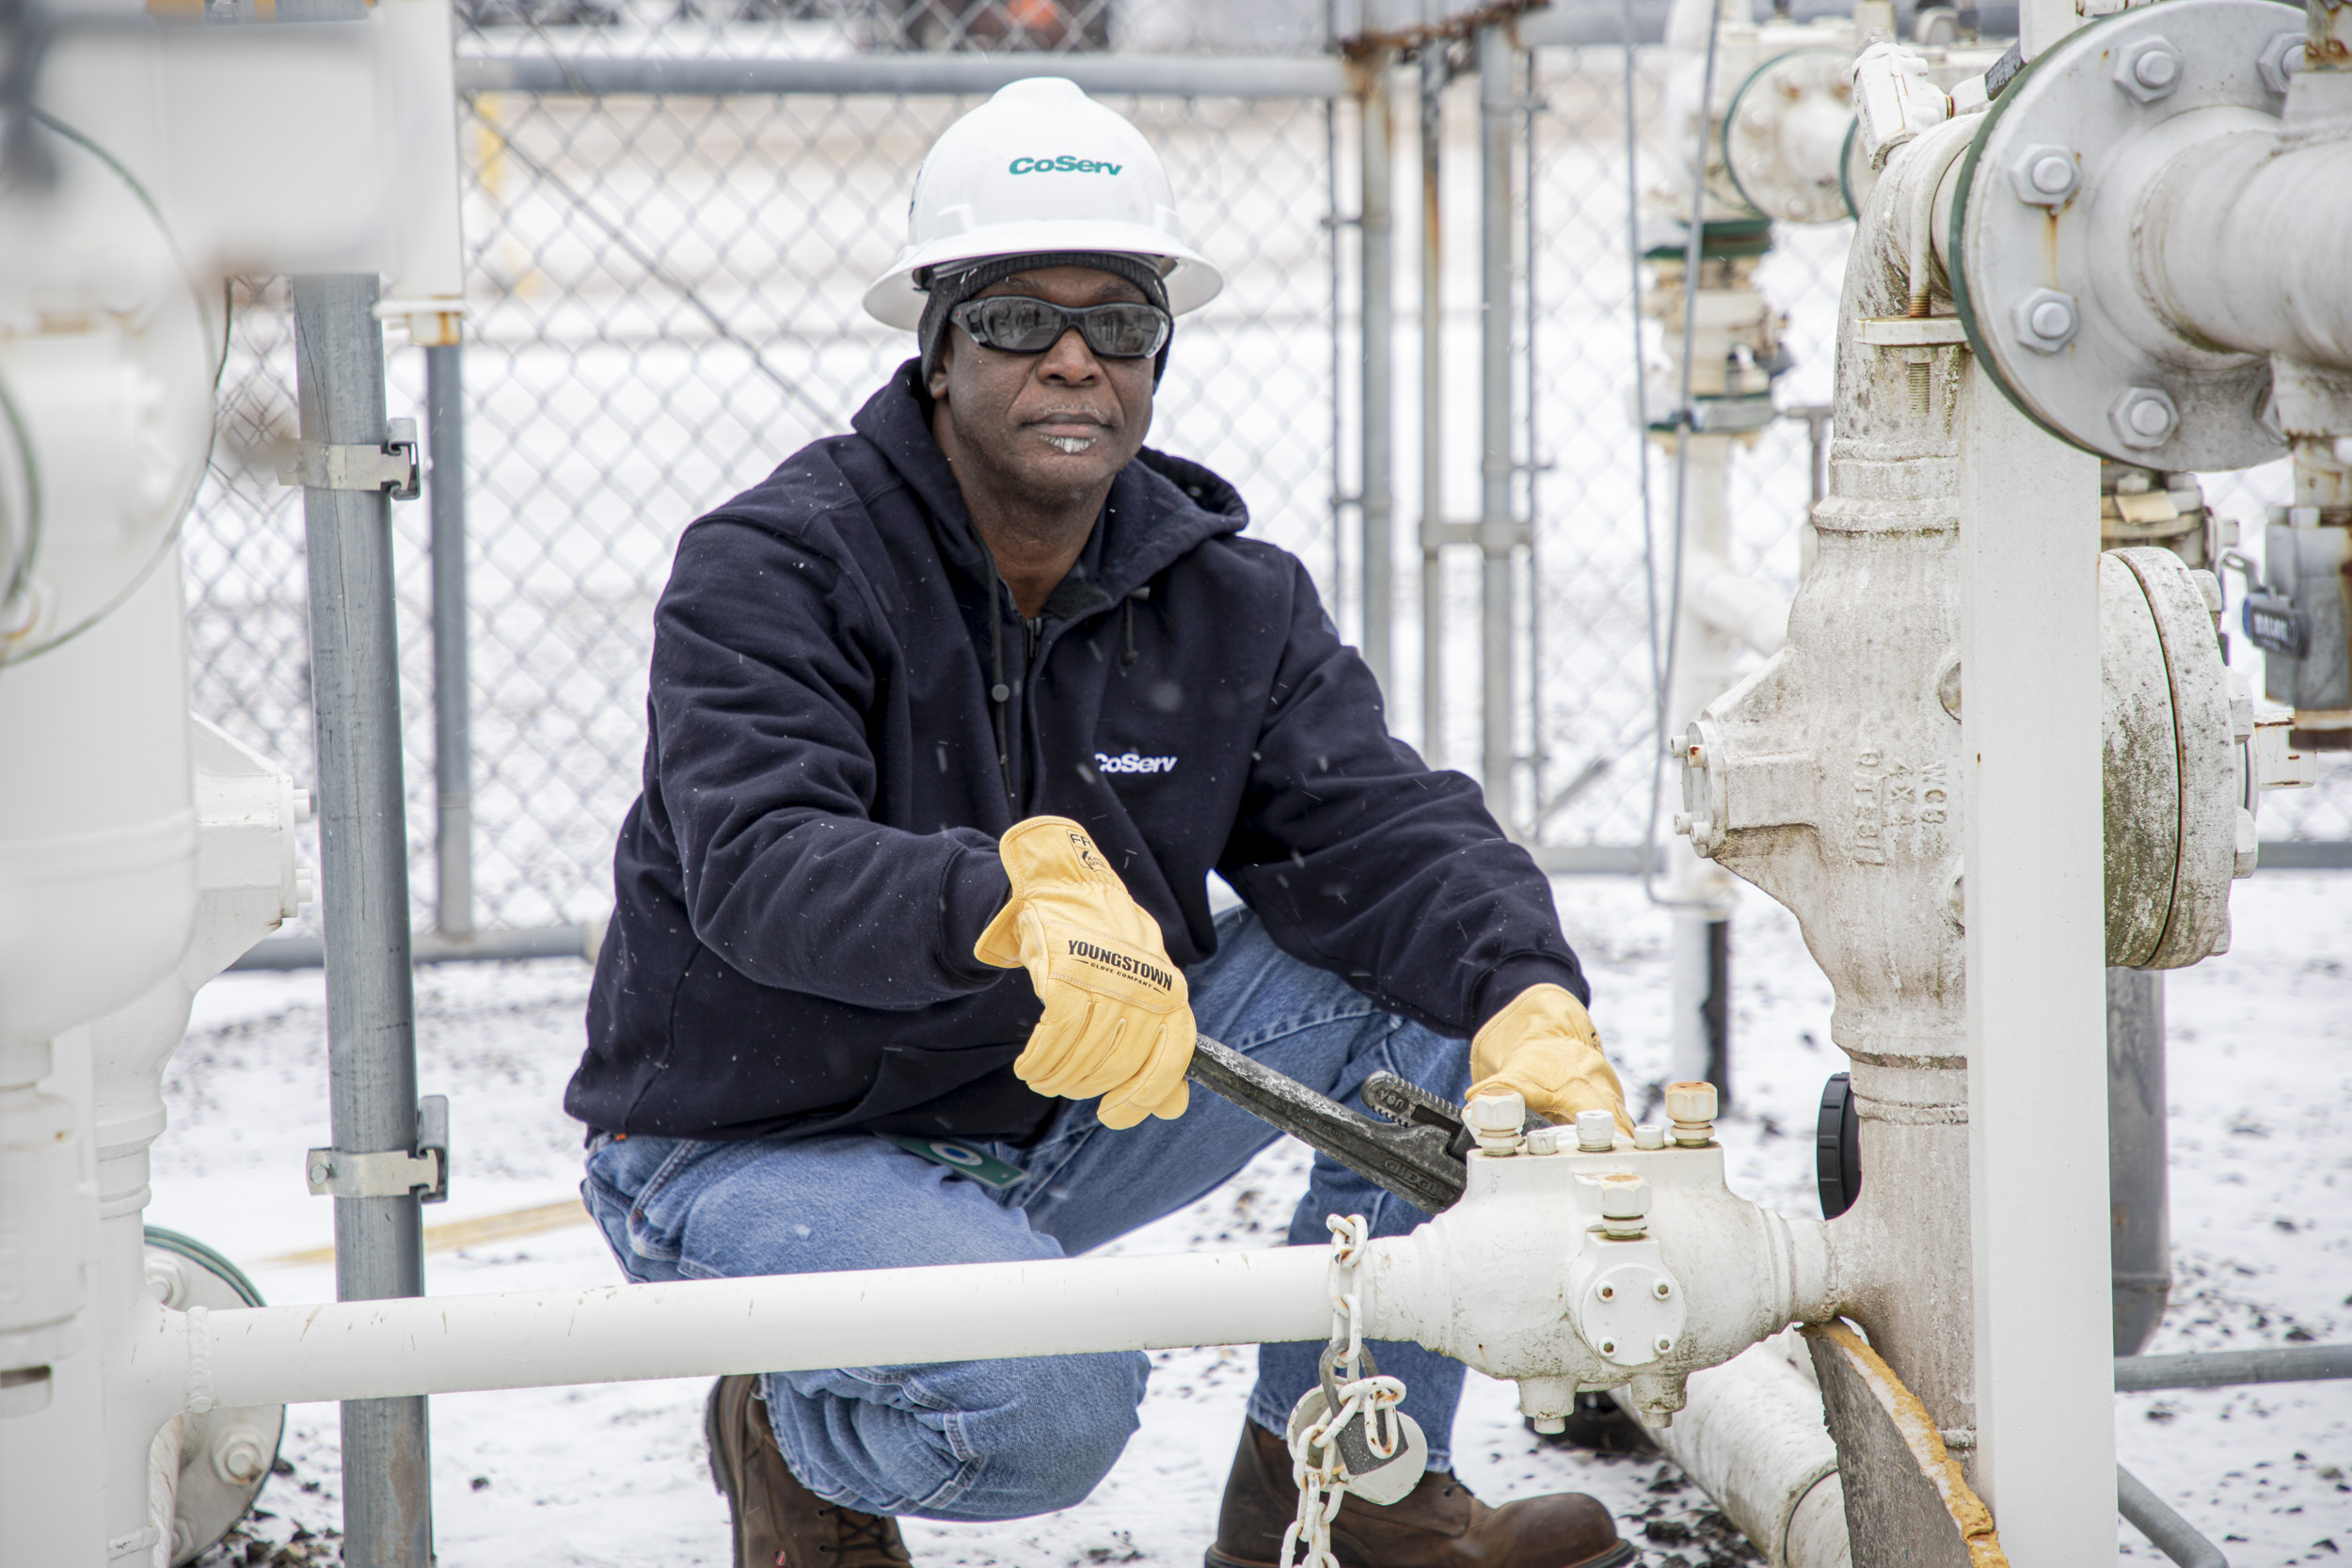 CoServ Gas Technicians respond during winter storms to ensure gas continues to flow to Customers. 